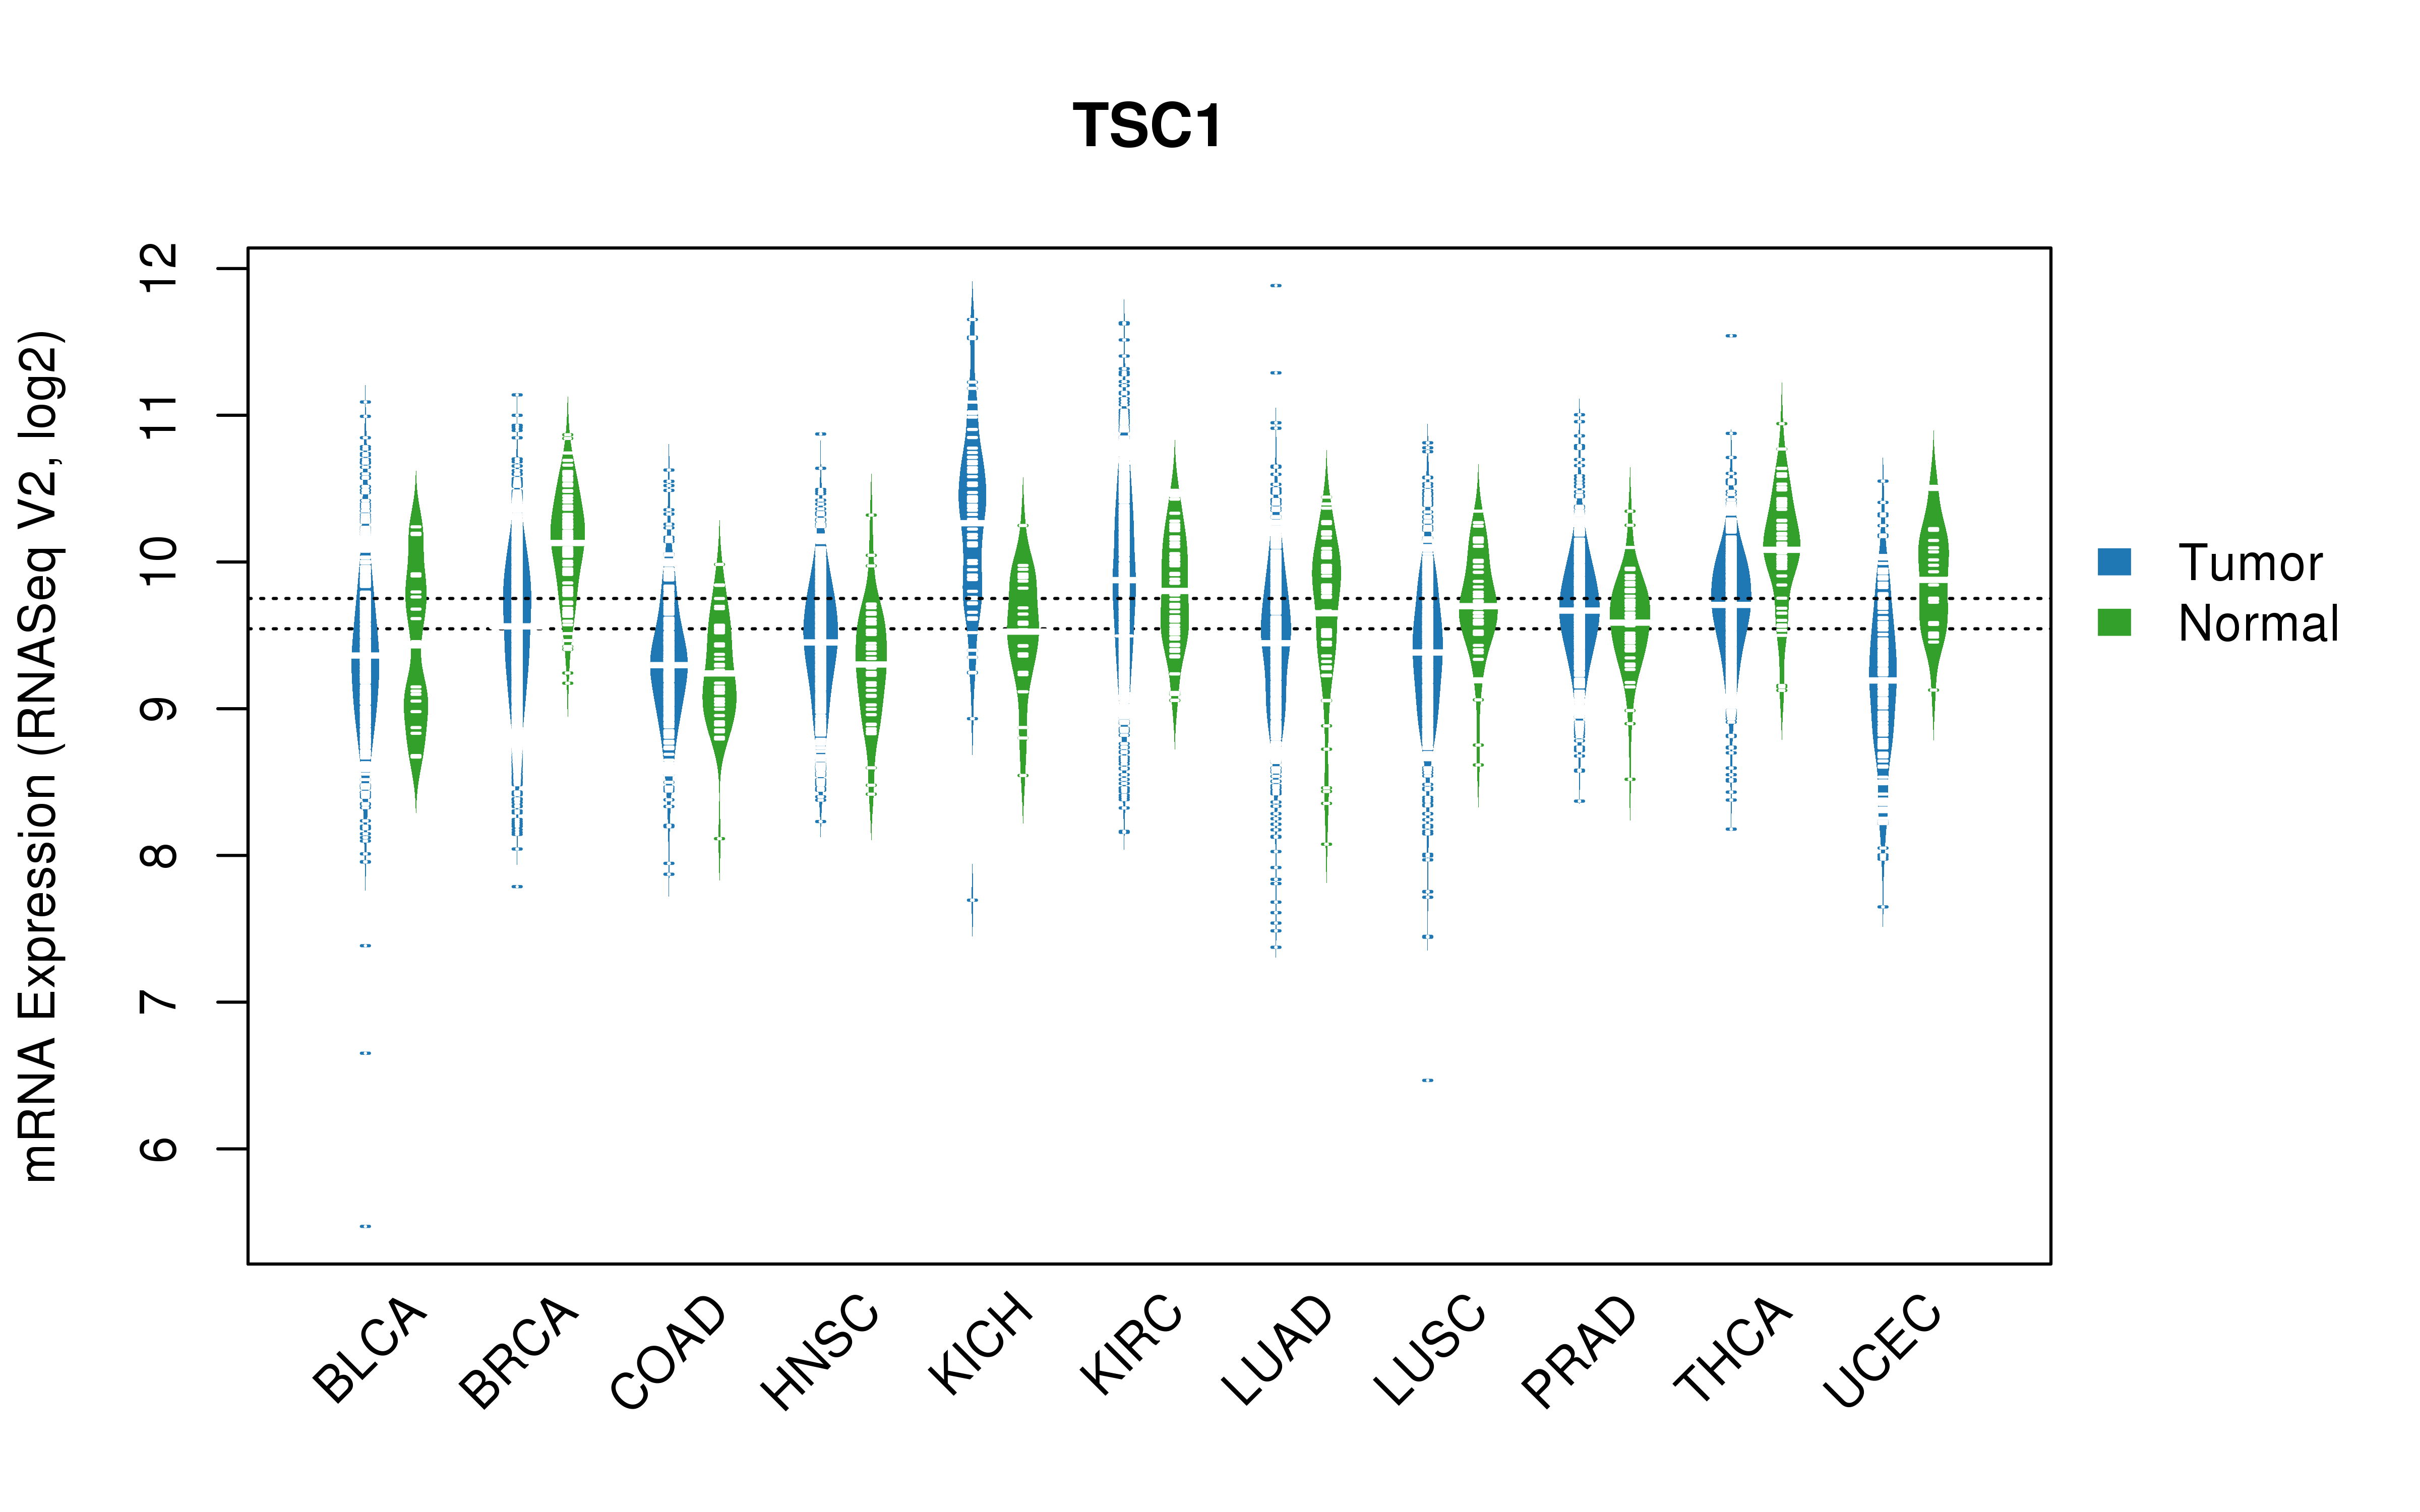 TCGA pan-cancer gene expression summary; We extracted RNASeqV2 normalized gene expression data from TCGA using the R package TCGA-Assembler. All public data files on TCGA DCC data server were gathered on Jan-05-2015.